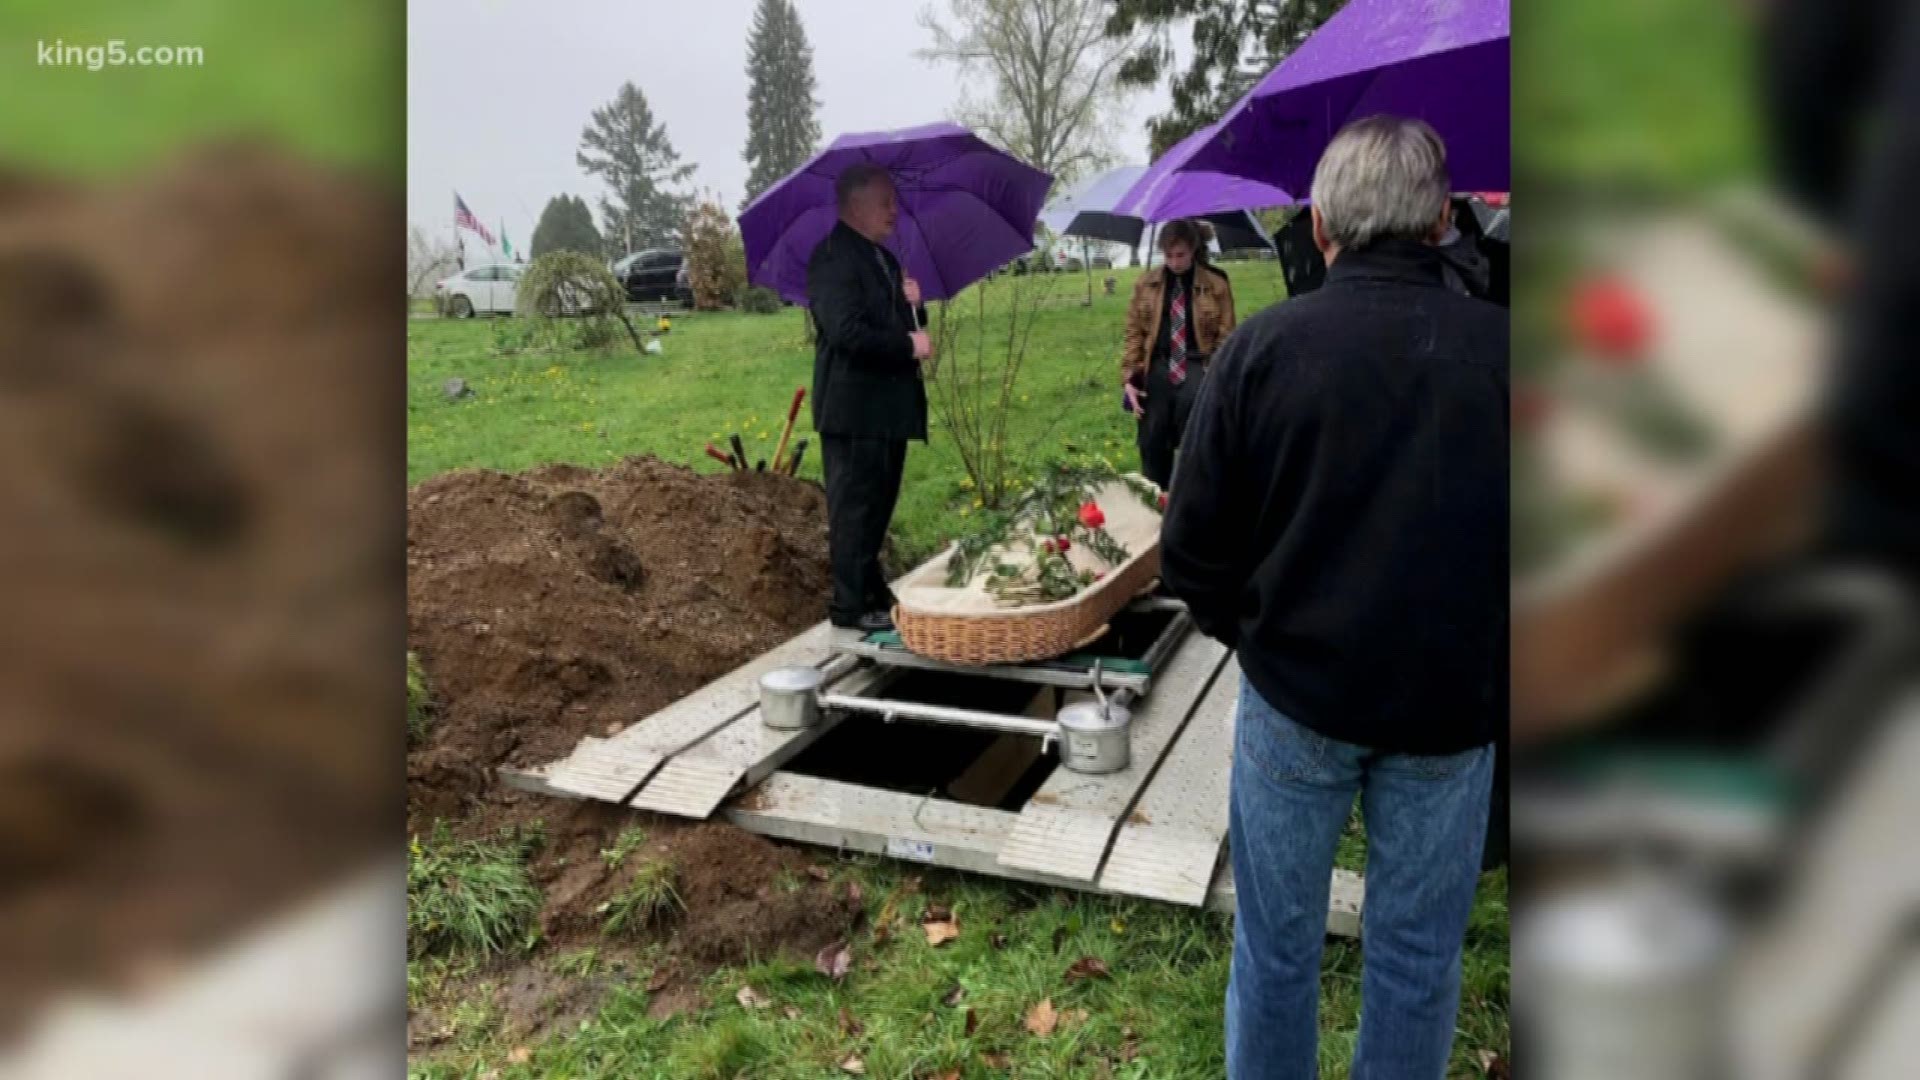 Starting in 2020, family members will have the option to turn a deceased relative into a nutrient rich soil.  As Sebastian Robertson shows us, the process of an organic burial is already bringing comfort to some families.